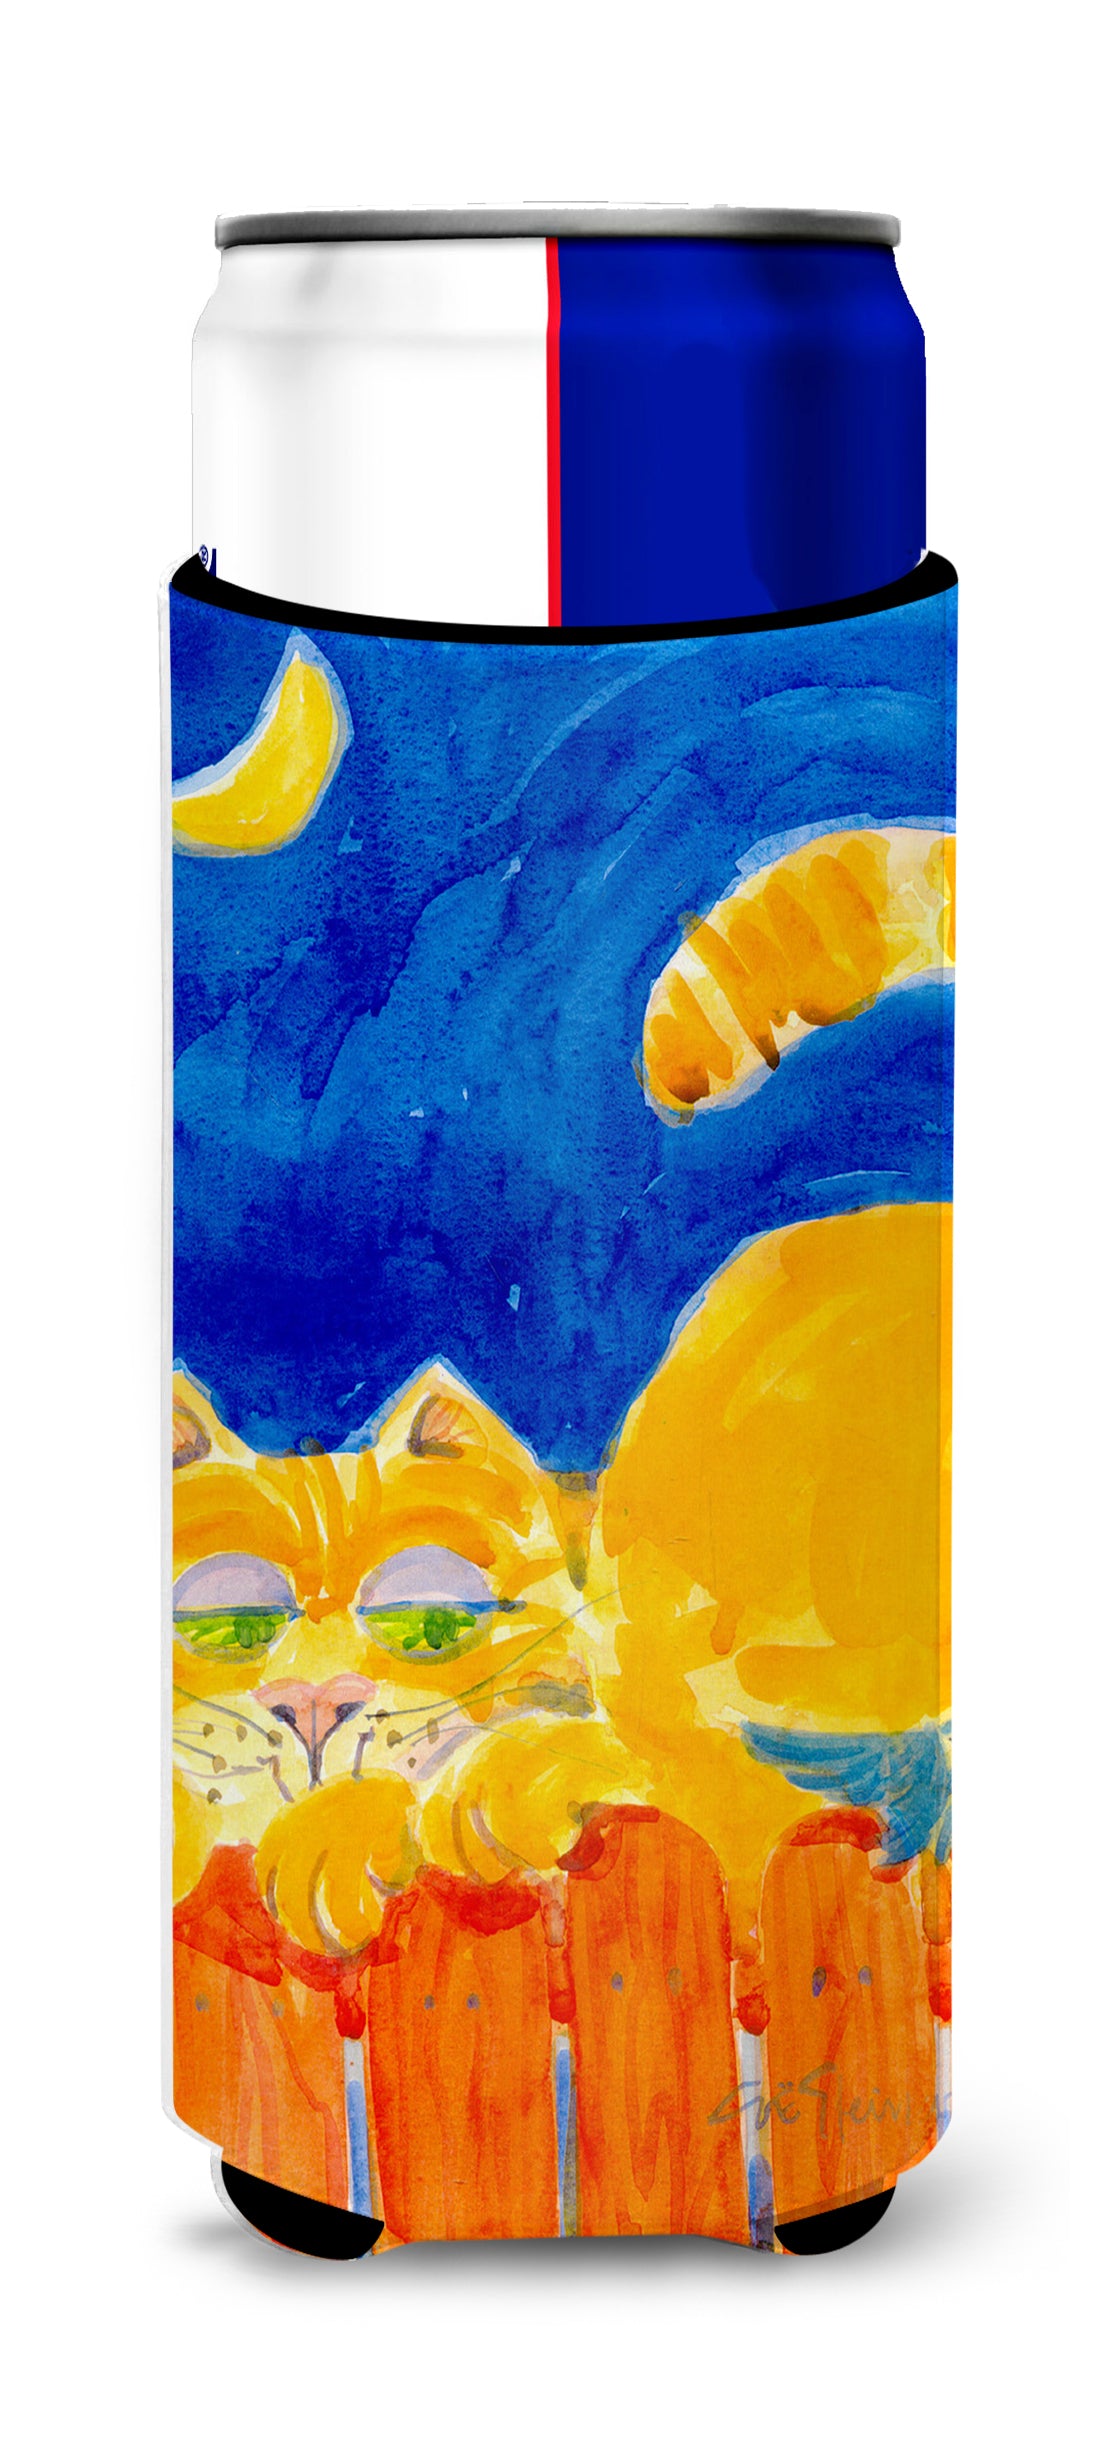 Big orange Tabby cat on the fence Ultra Beverage Insulators for slim cans 6020MUK.